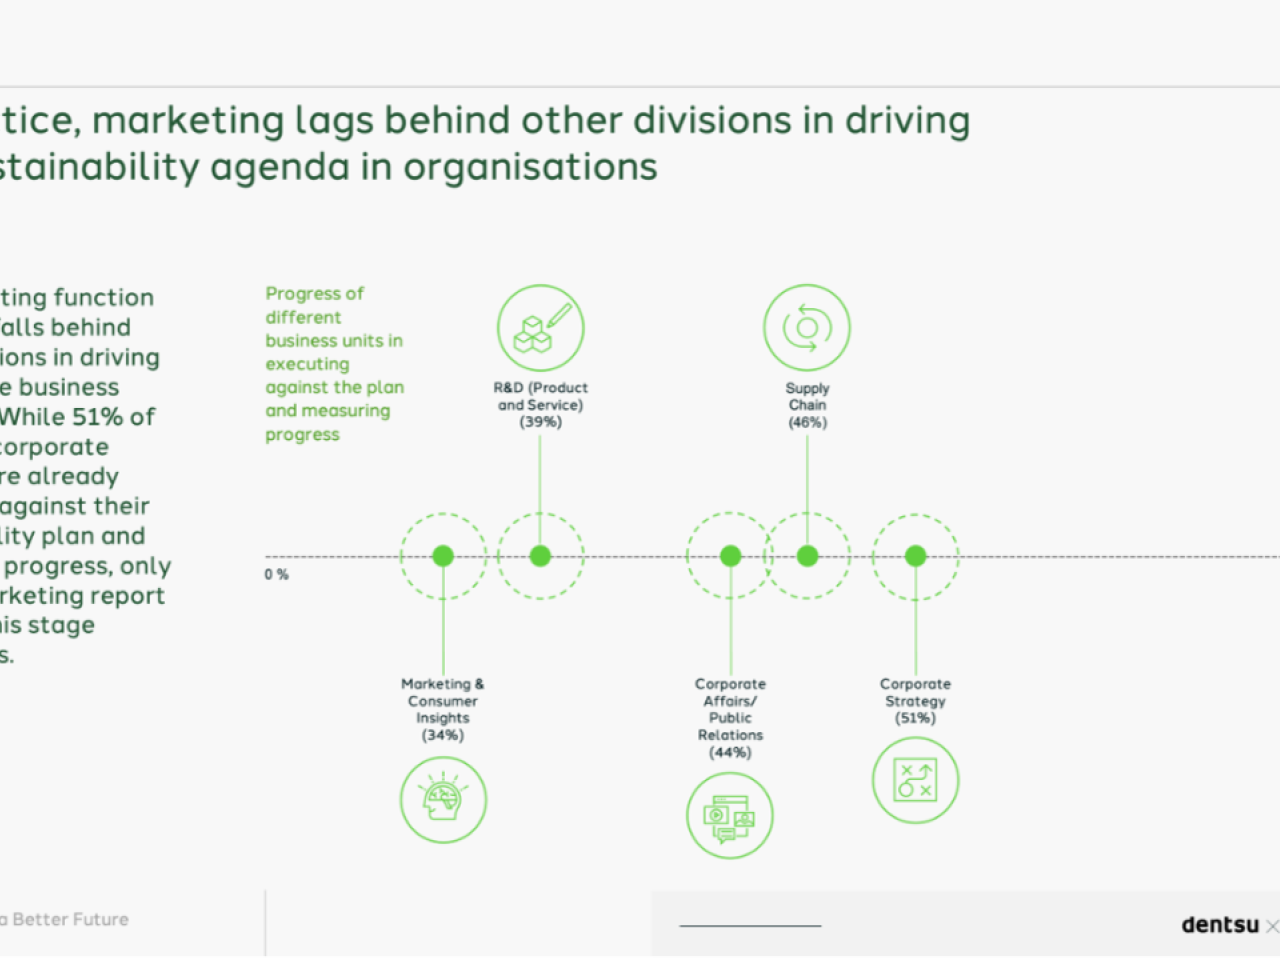 Graph depicting how Marketing and Insights departments lag behind other business divisions when it comes to executing and measuring progress on their sustainability objectives